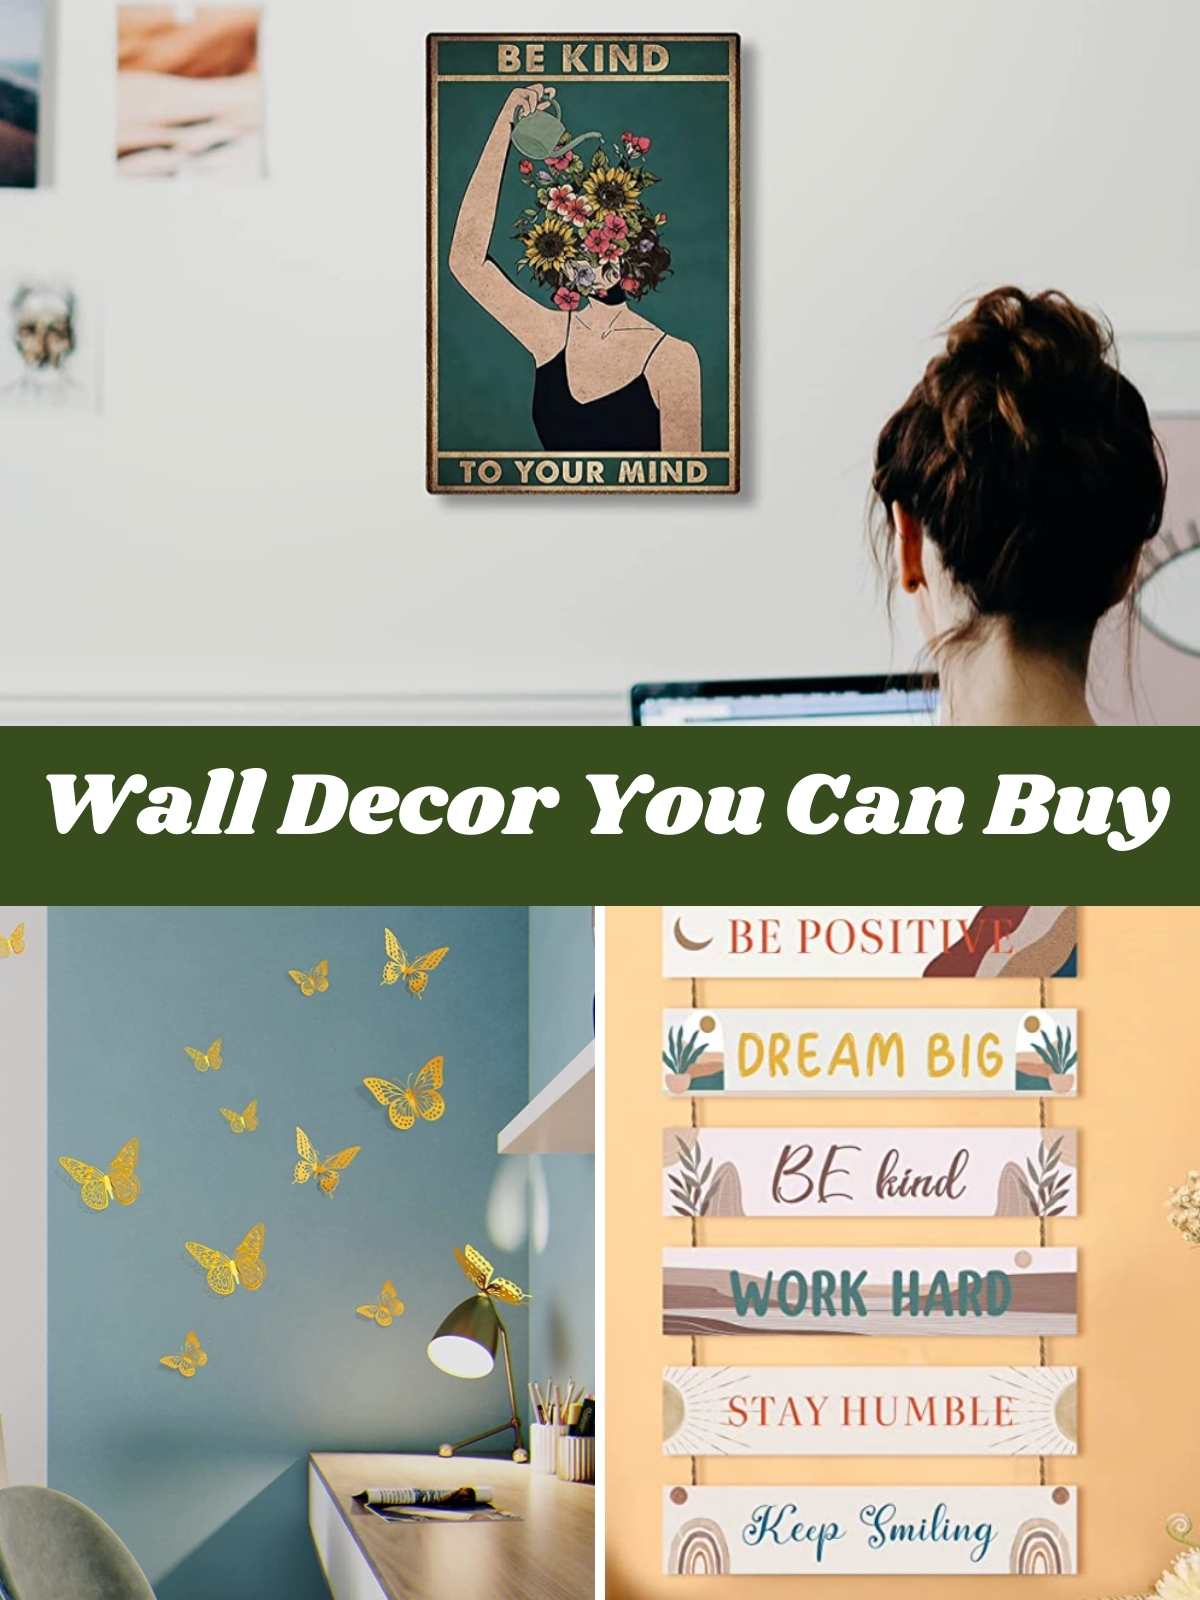 wall decor you can buy. 3 different photos example.